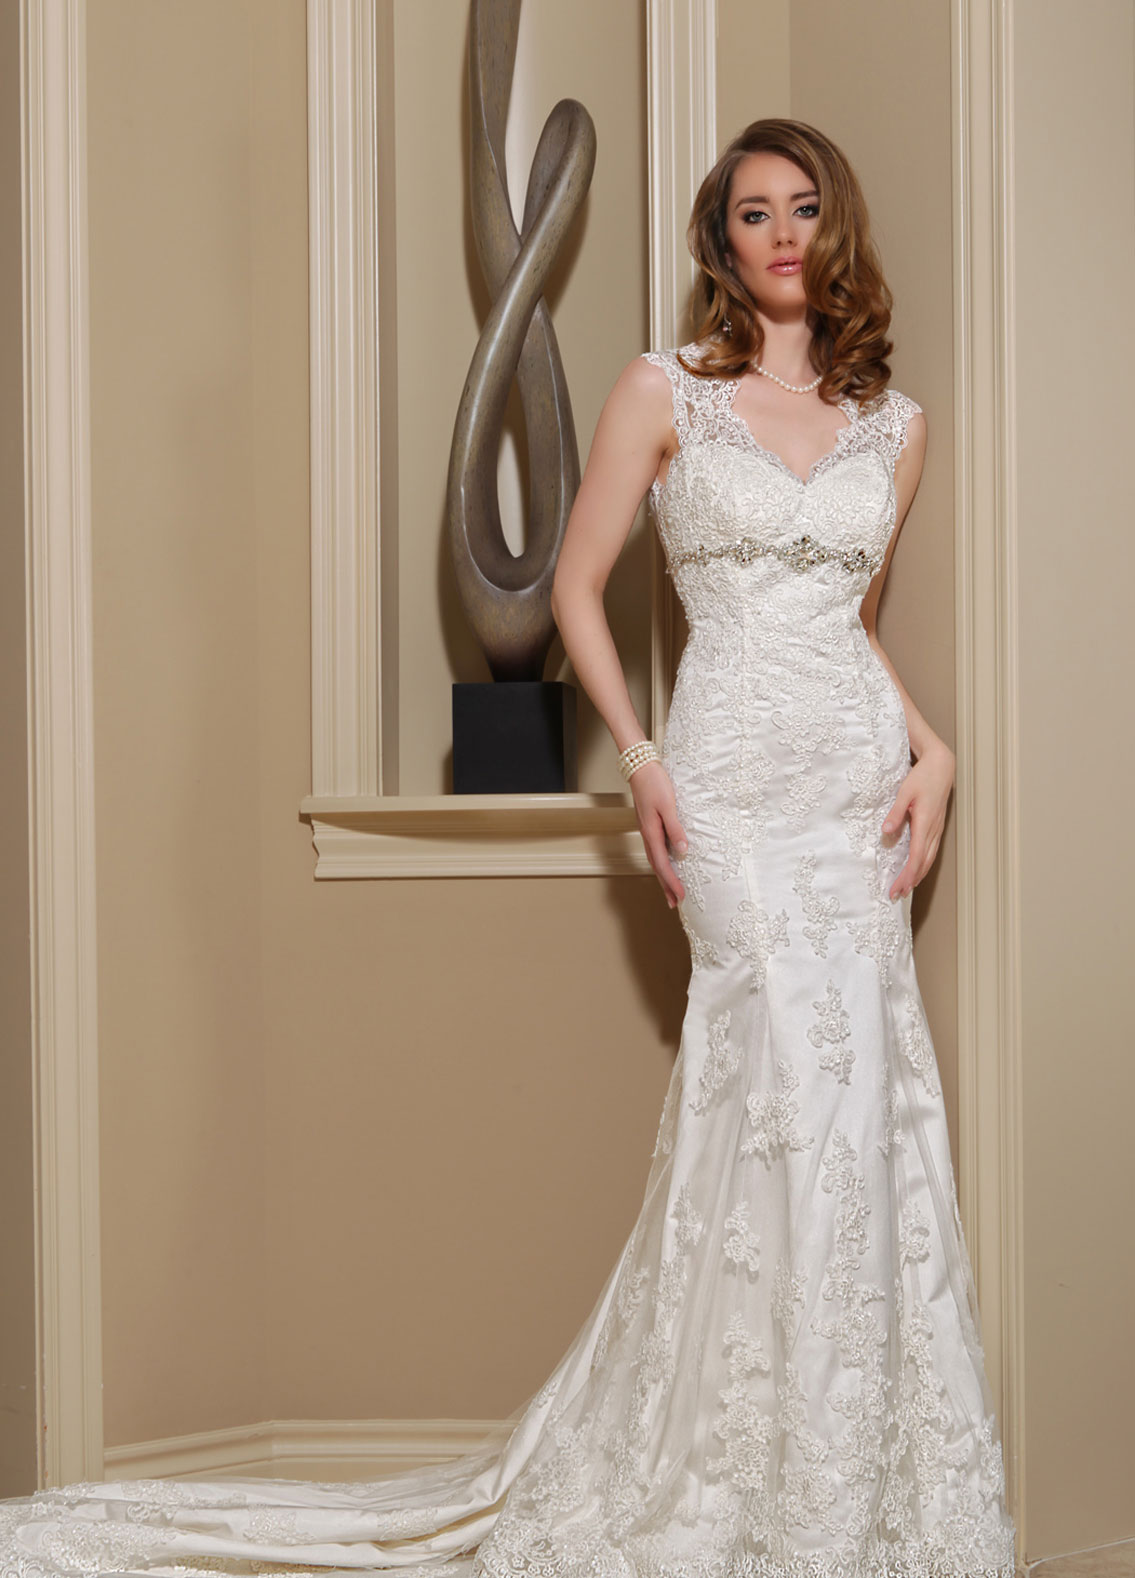 Empire Waist Wedding Dresses for the Perfect Fit